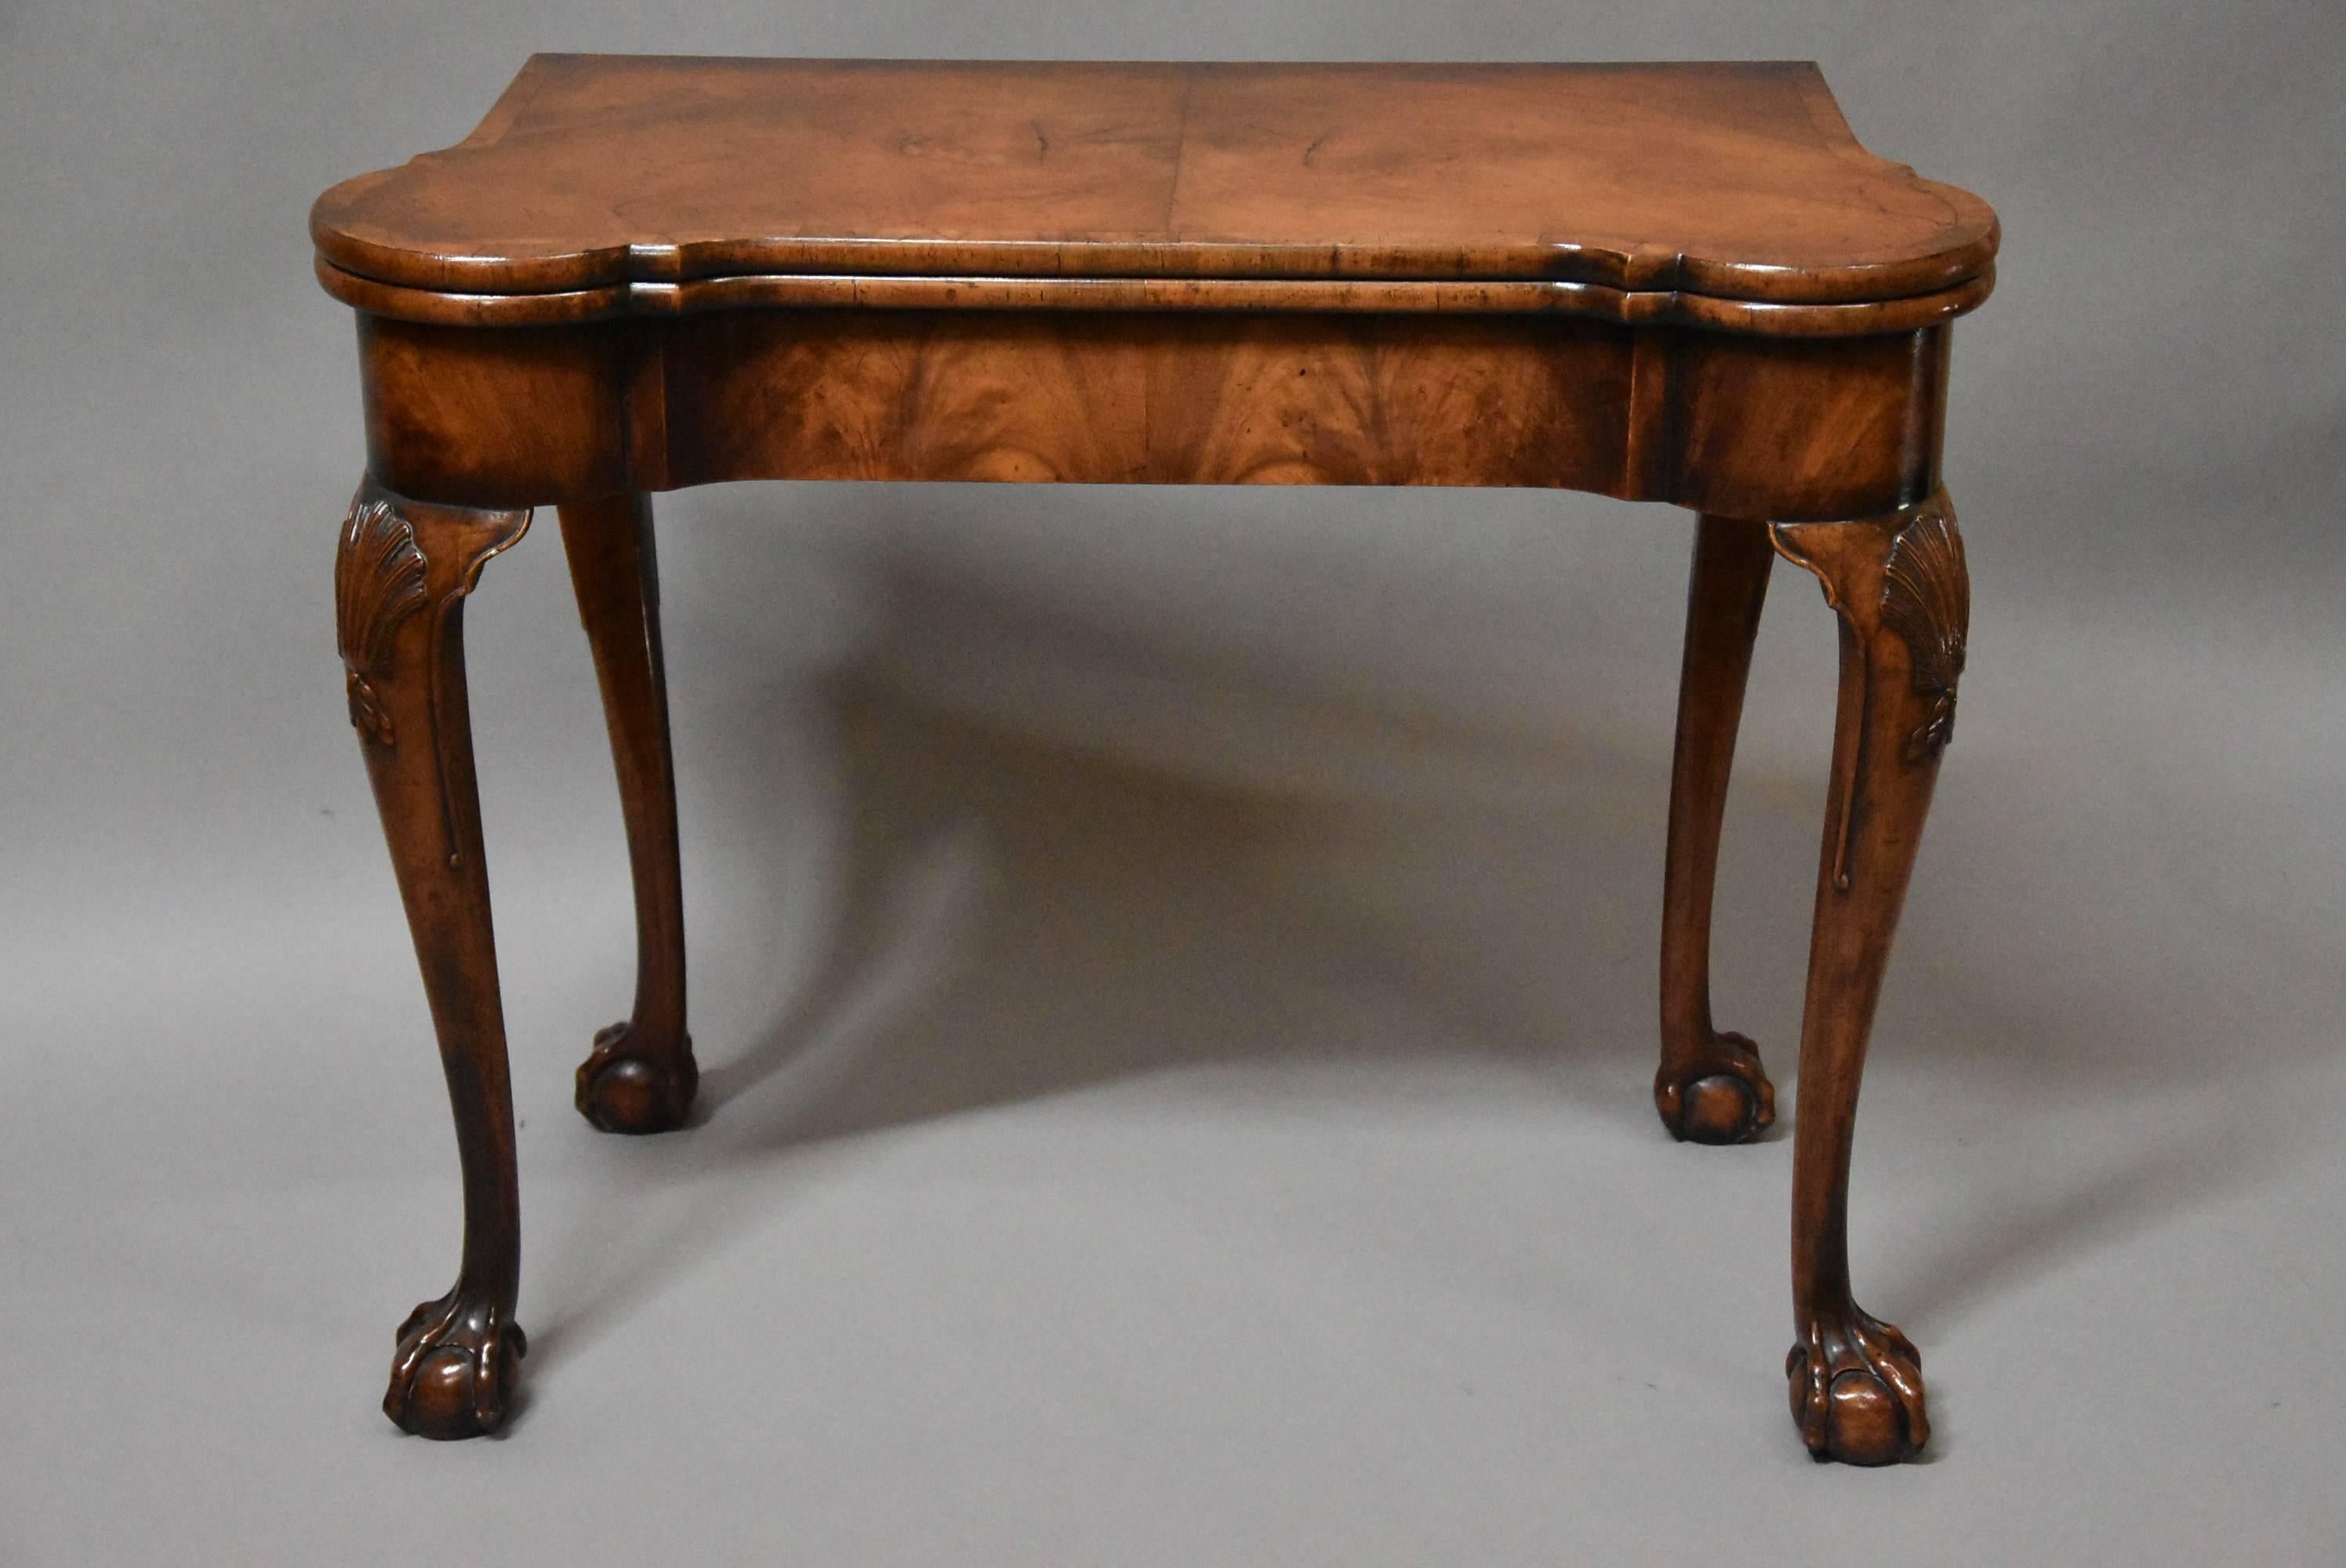 A fine quality early 20th century walnut card table with concertina action in the Queen Anne style.

This table consists of a finely figured mirror veneered walnut top with cross grain banding and rounded corners leading down to a figured walnut